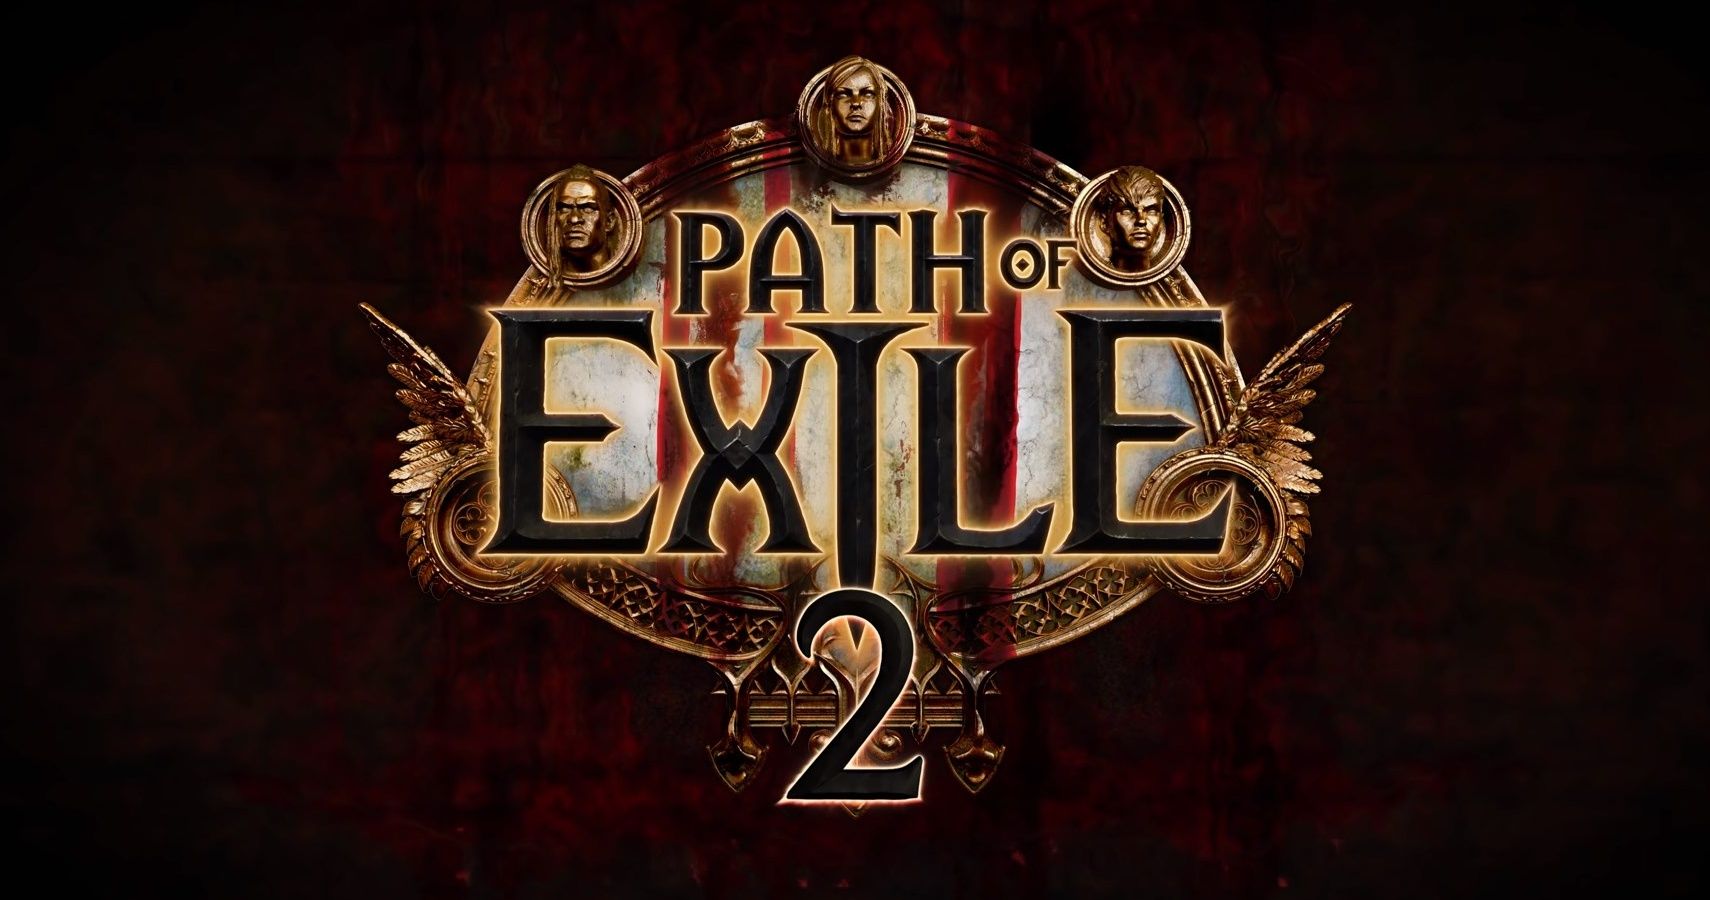 path of exile 2 release date ps4